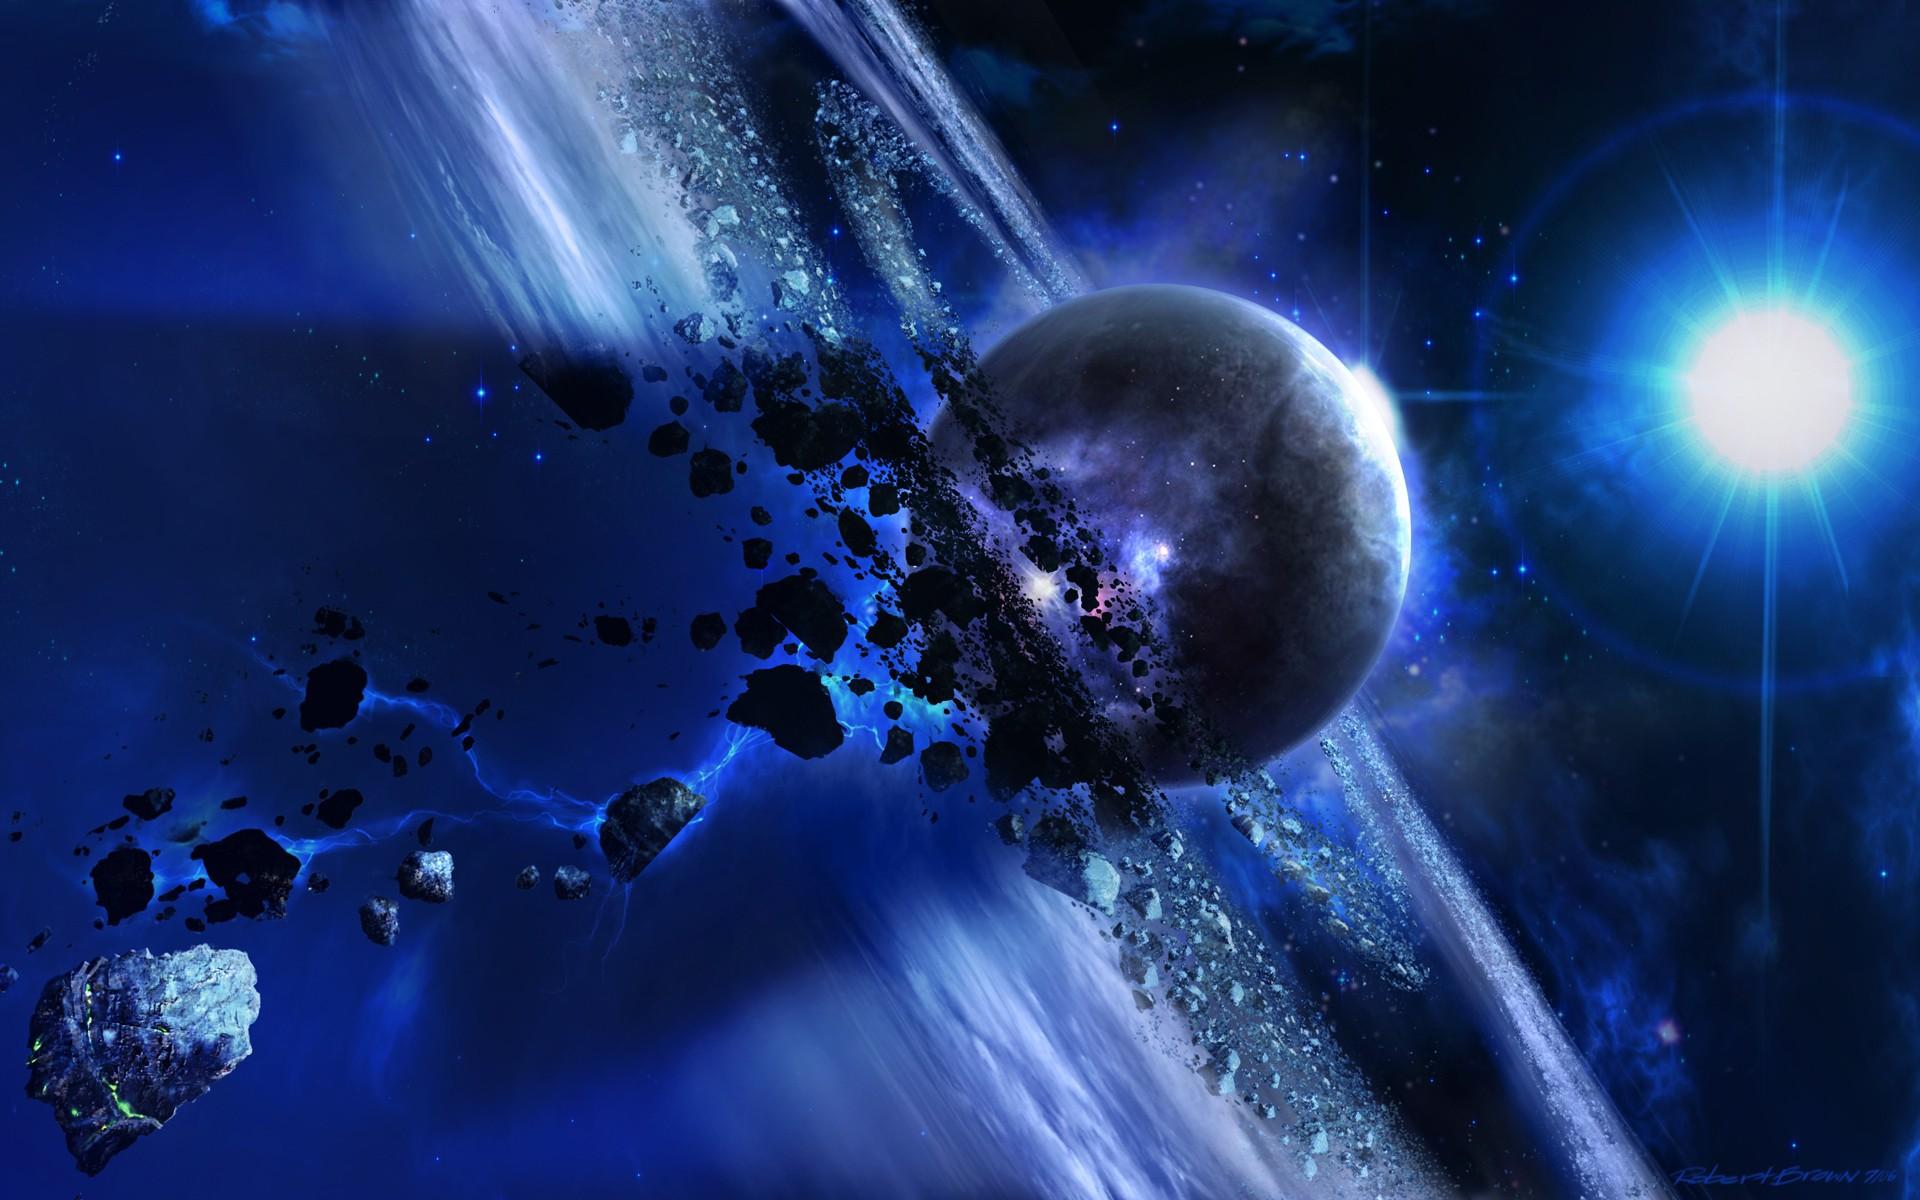 asteroids, planets, stars, outer space, blue wallpaper